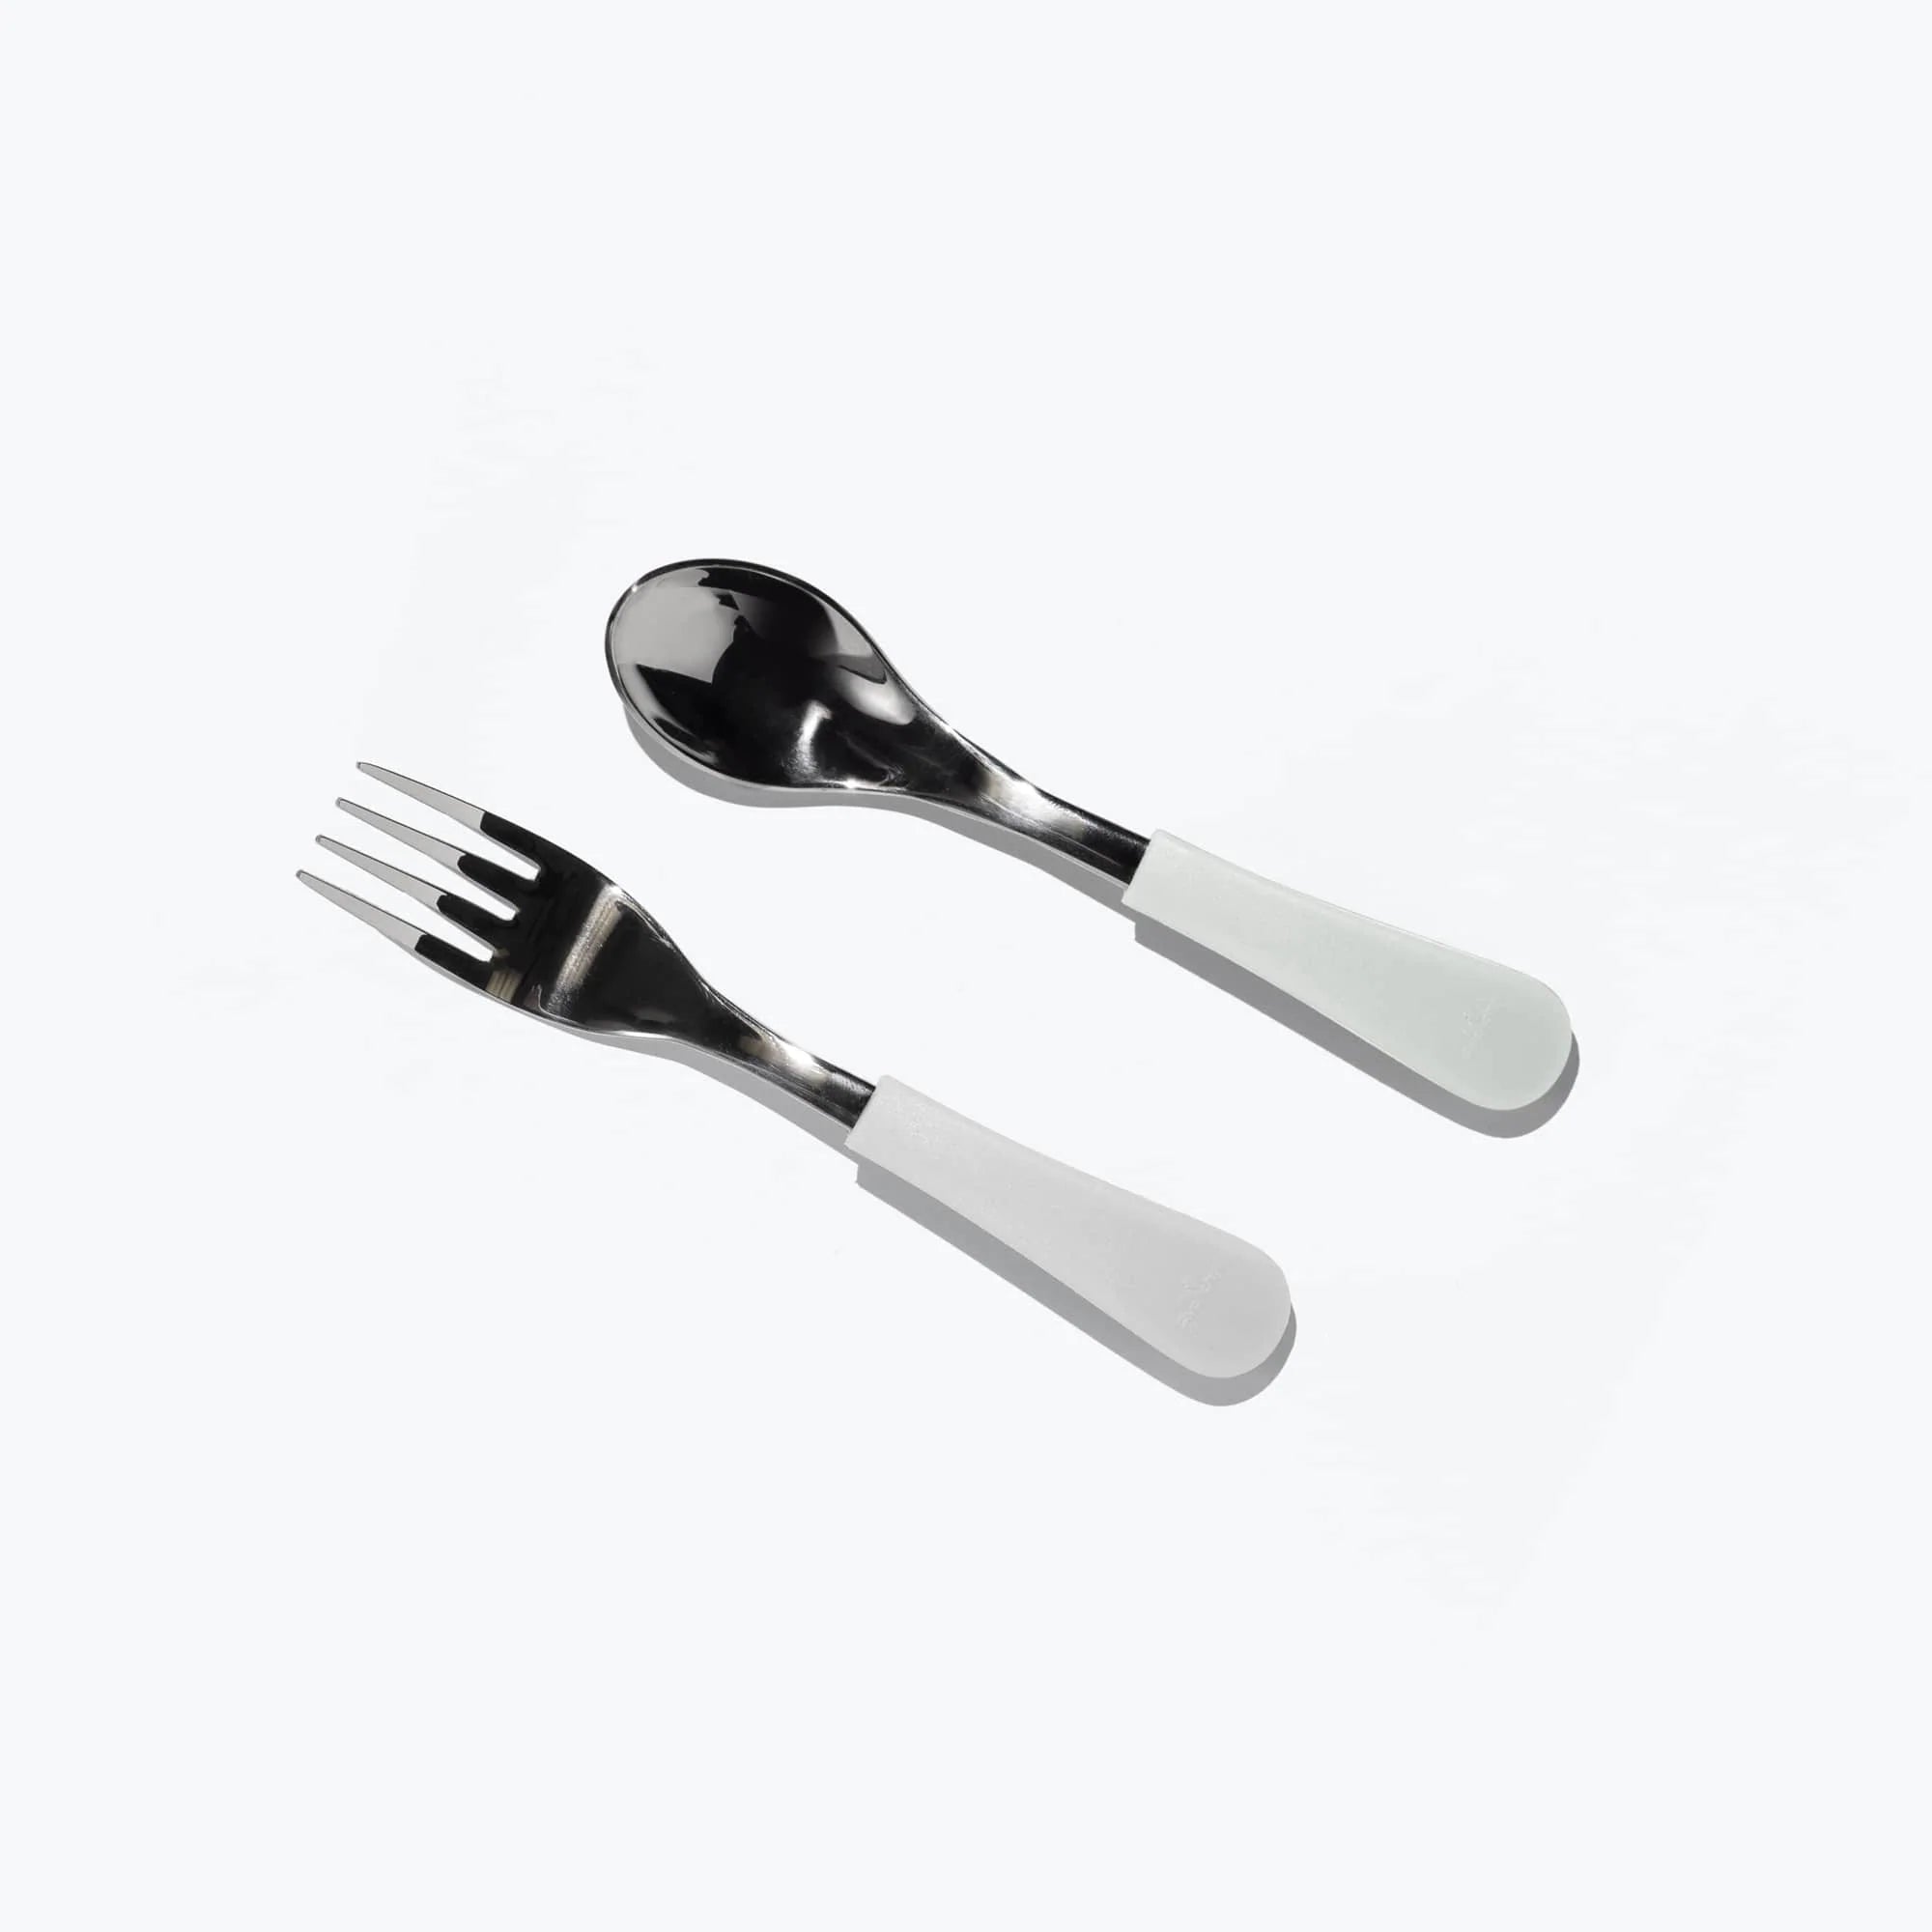 Avanchy Stainless Steel Baby Fork / Spoon, 2 Pack - ANB Baby -$20 - $50